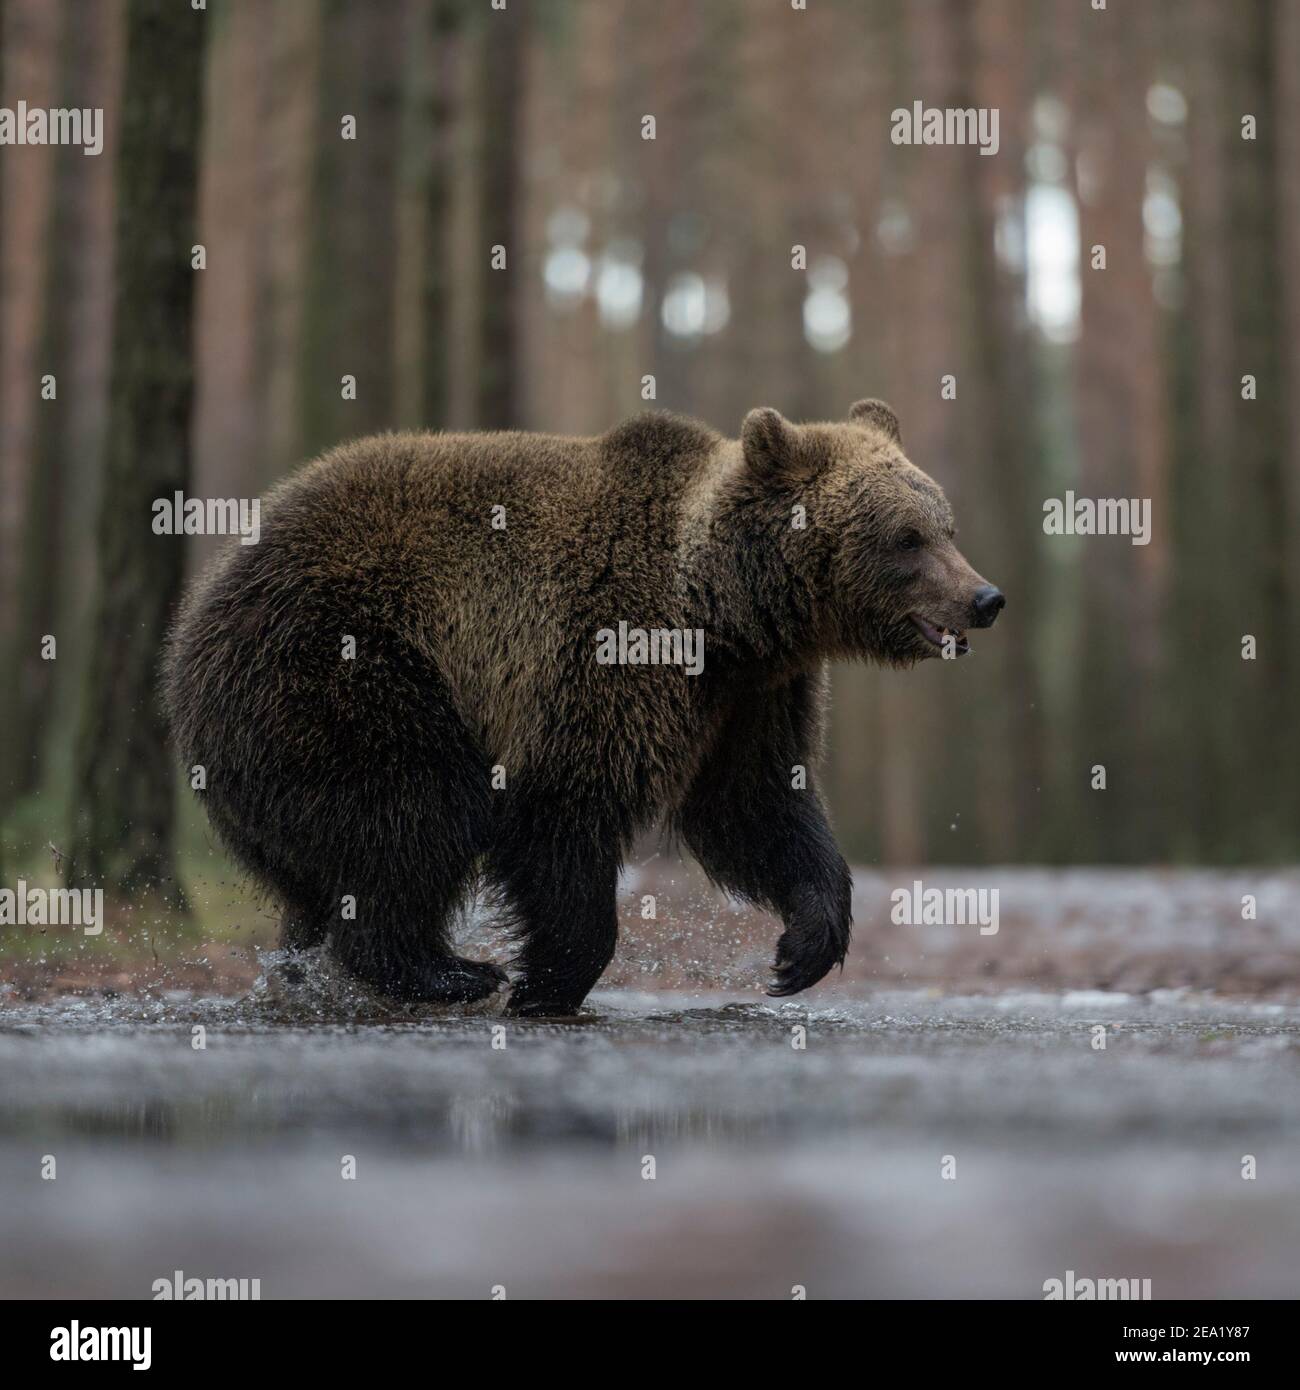 Eurasian Brown Bear / Europaeischer Braunbaer ( Ursus arctos ) on its way through a frozen puddle, crossing a forest road, in winter, looks funny, Eur Stock Photo